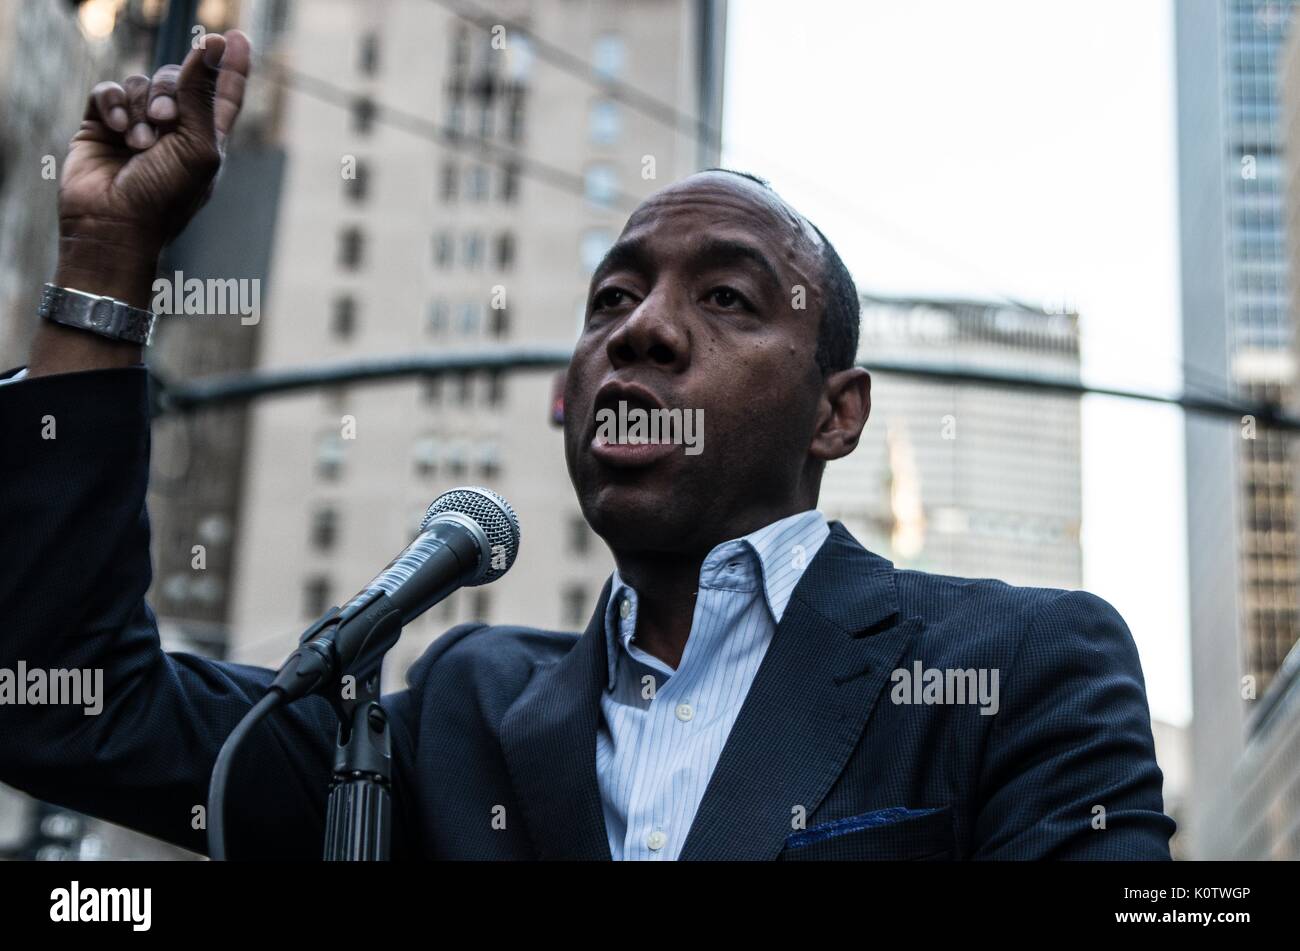 New York City, New York, USA. 23rd Aug, 2017. Pastor Jamal Bryant. New Yorkers rallied behind now-unsigned NFL player Colin Kaepernick who has remained seated during the singing of the US Nation. al Anthem since 2016. Kaepernick has stated ''I am not going to stand up to show pride in a flag for a country that oppresses black people and people of color.' Credit: ZUMA Press, Inc./Alamy Live News Stock Photo